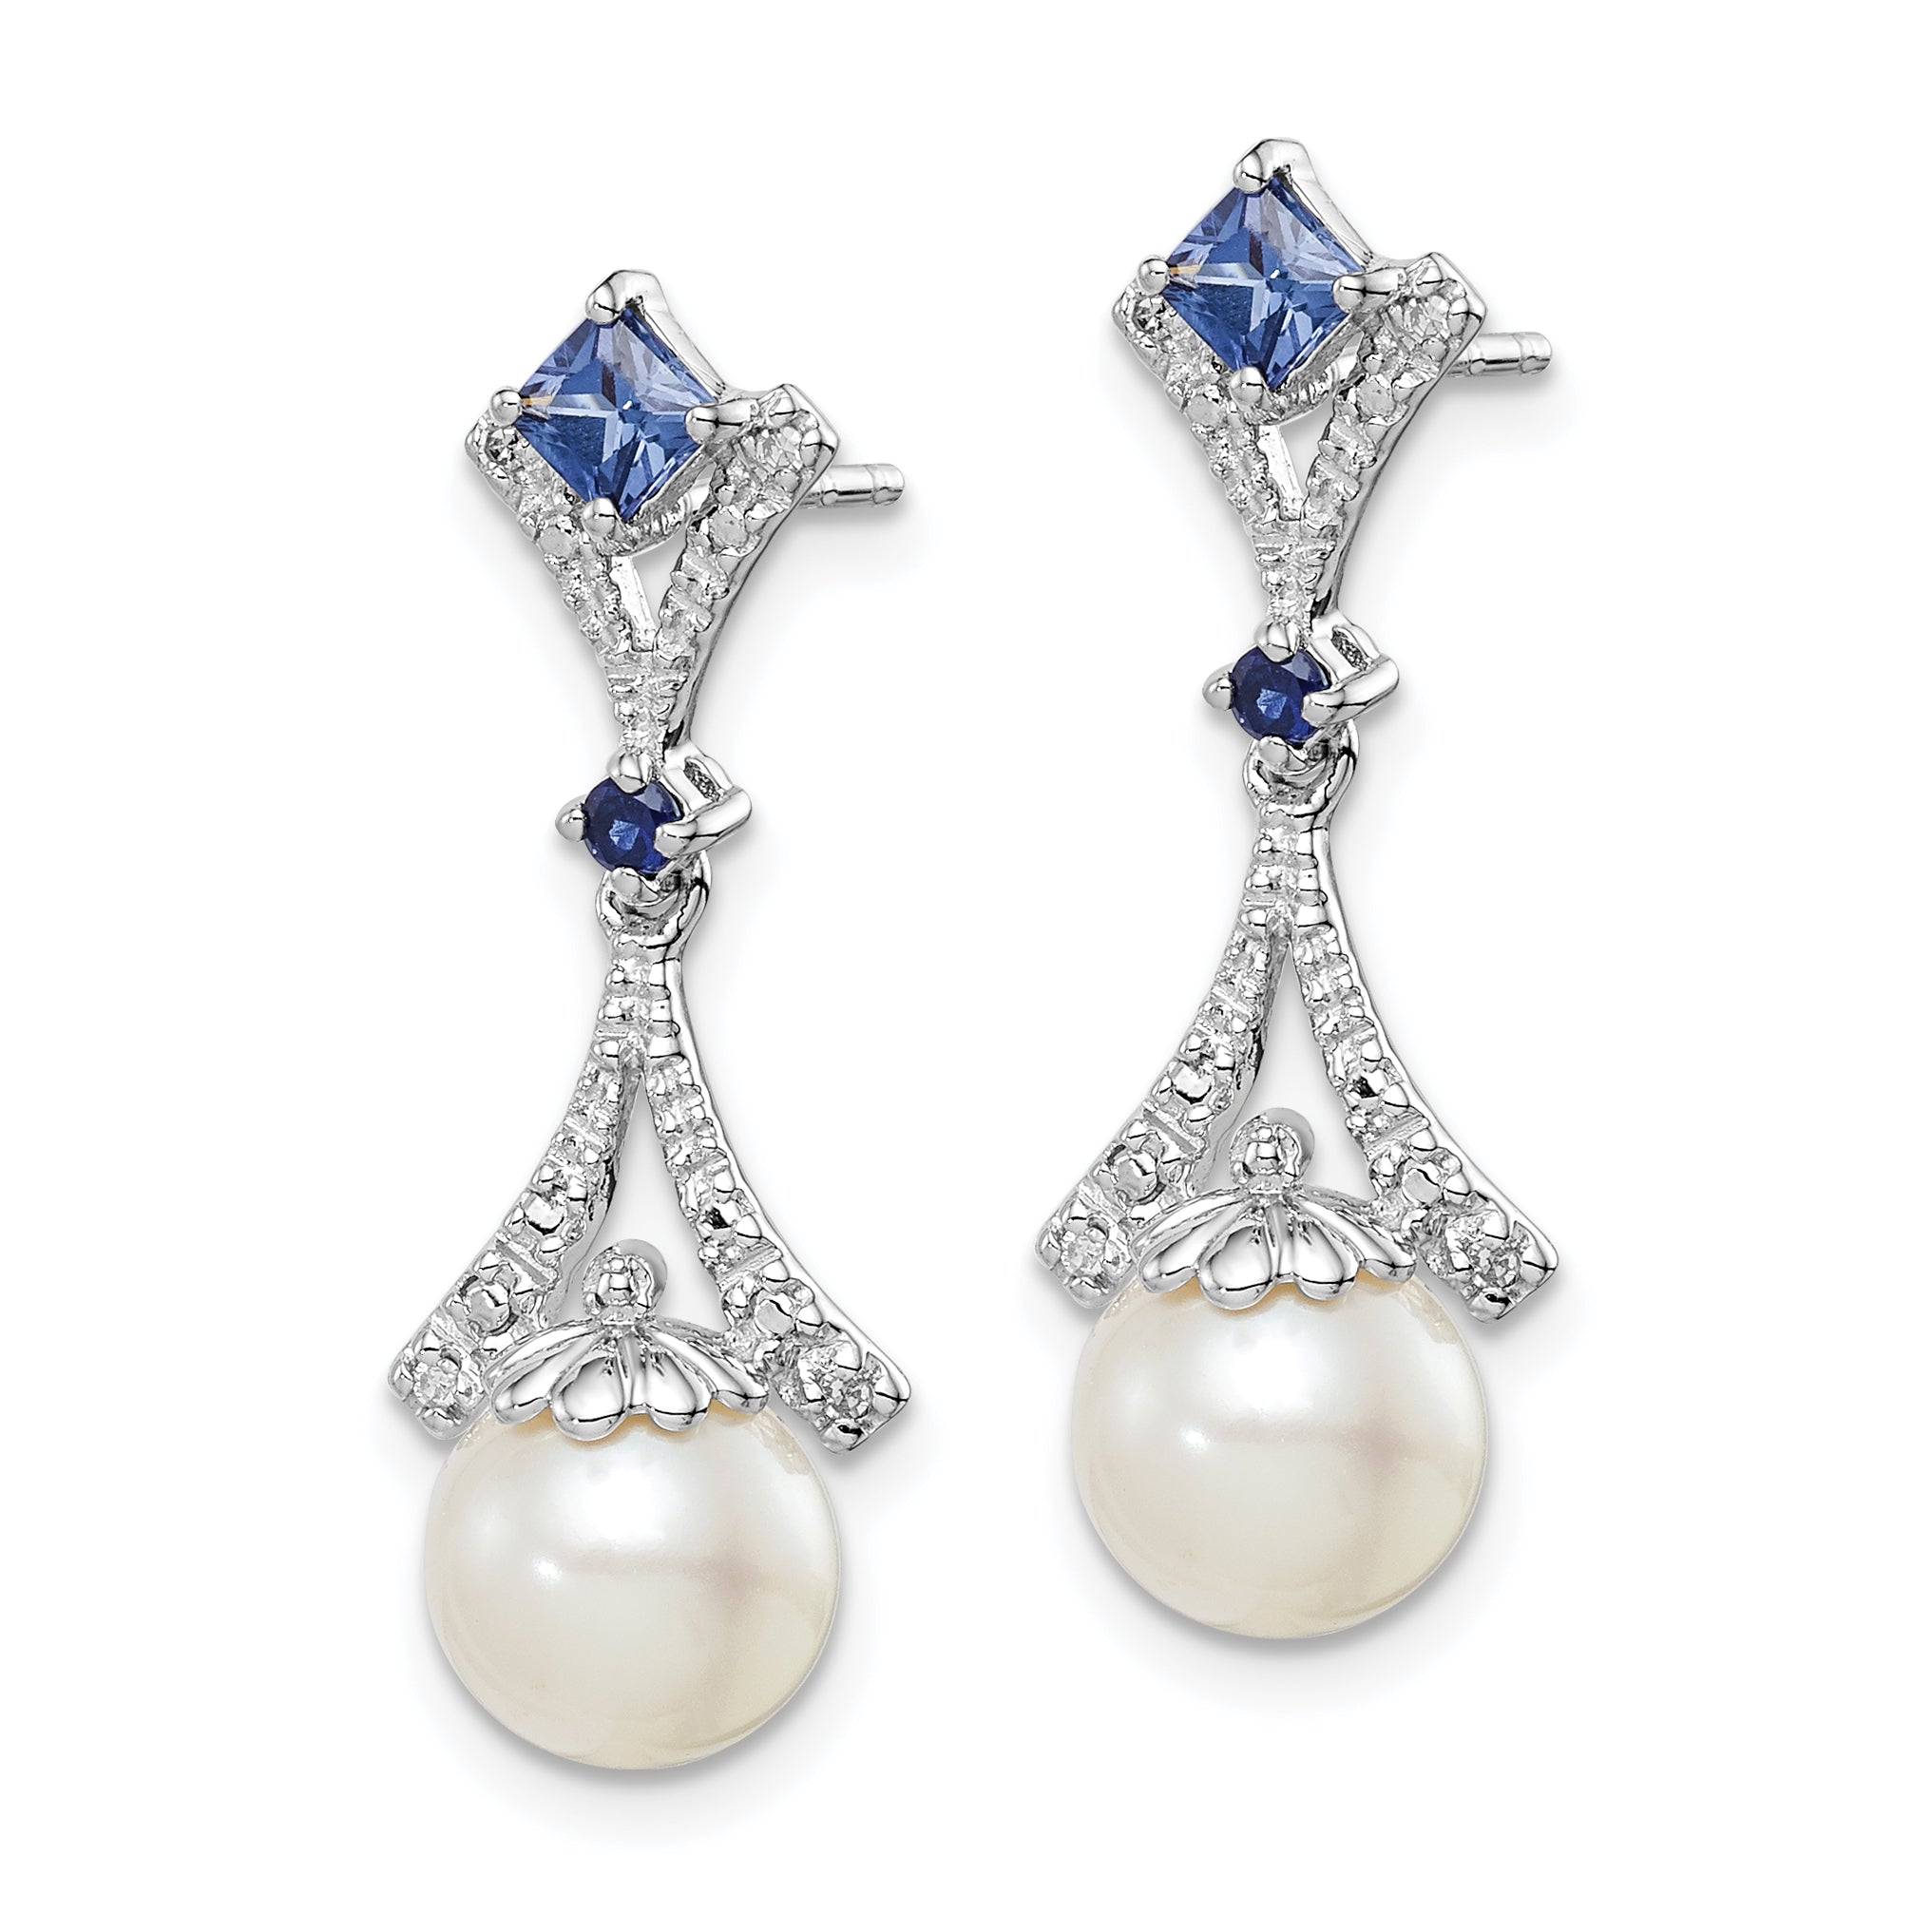 Sterling Silver Rhod Plated Dia. FW Cultured Pearl/Cr. Sapphire Ear